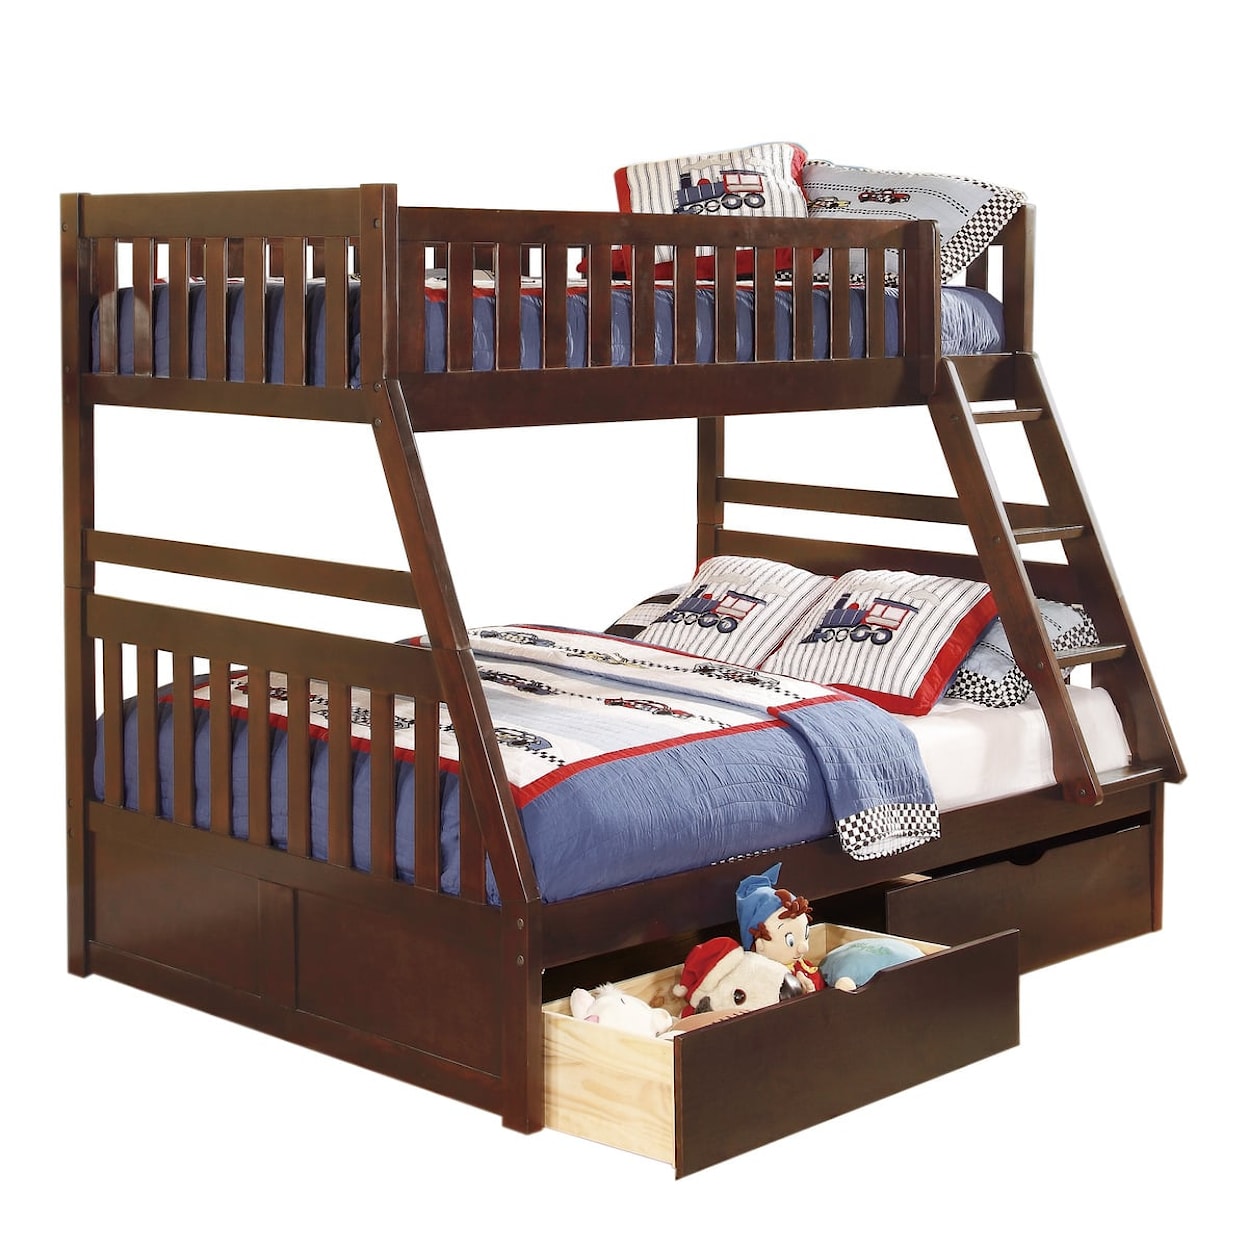 Homelegance Rowe Twin/Full Bunk Bed with Storage Boxes